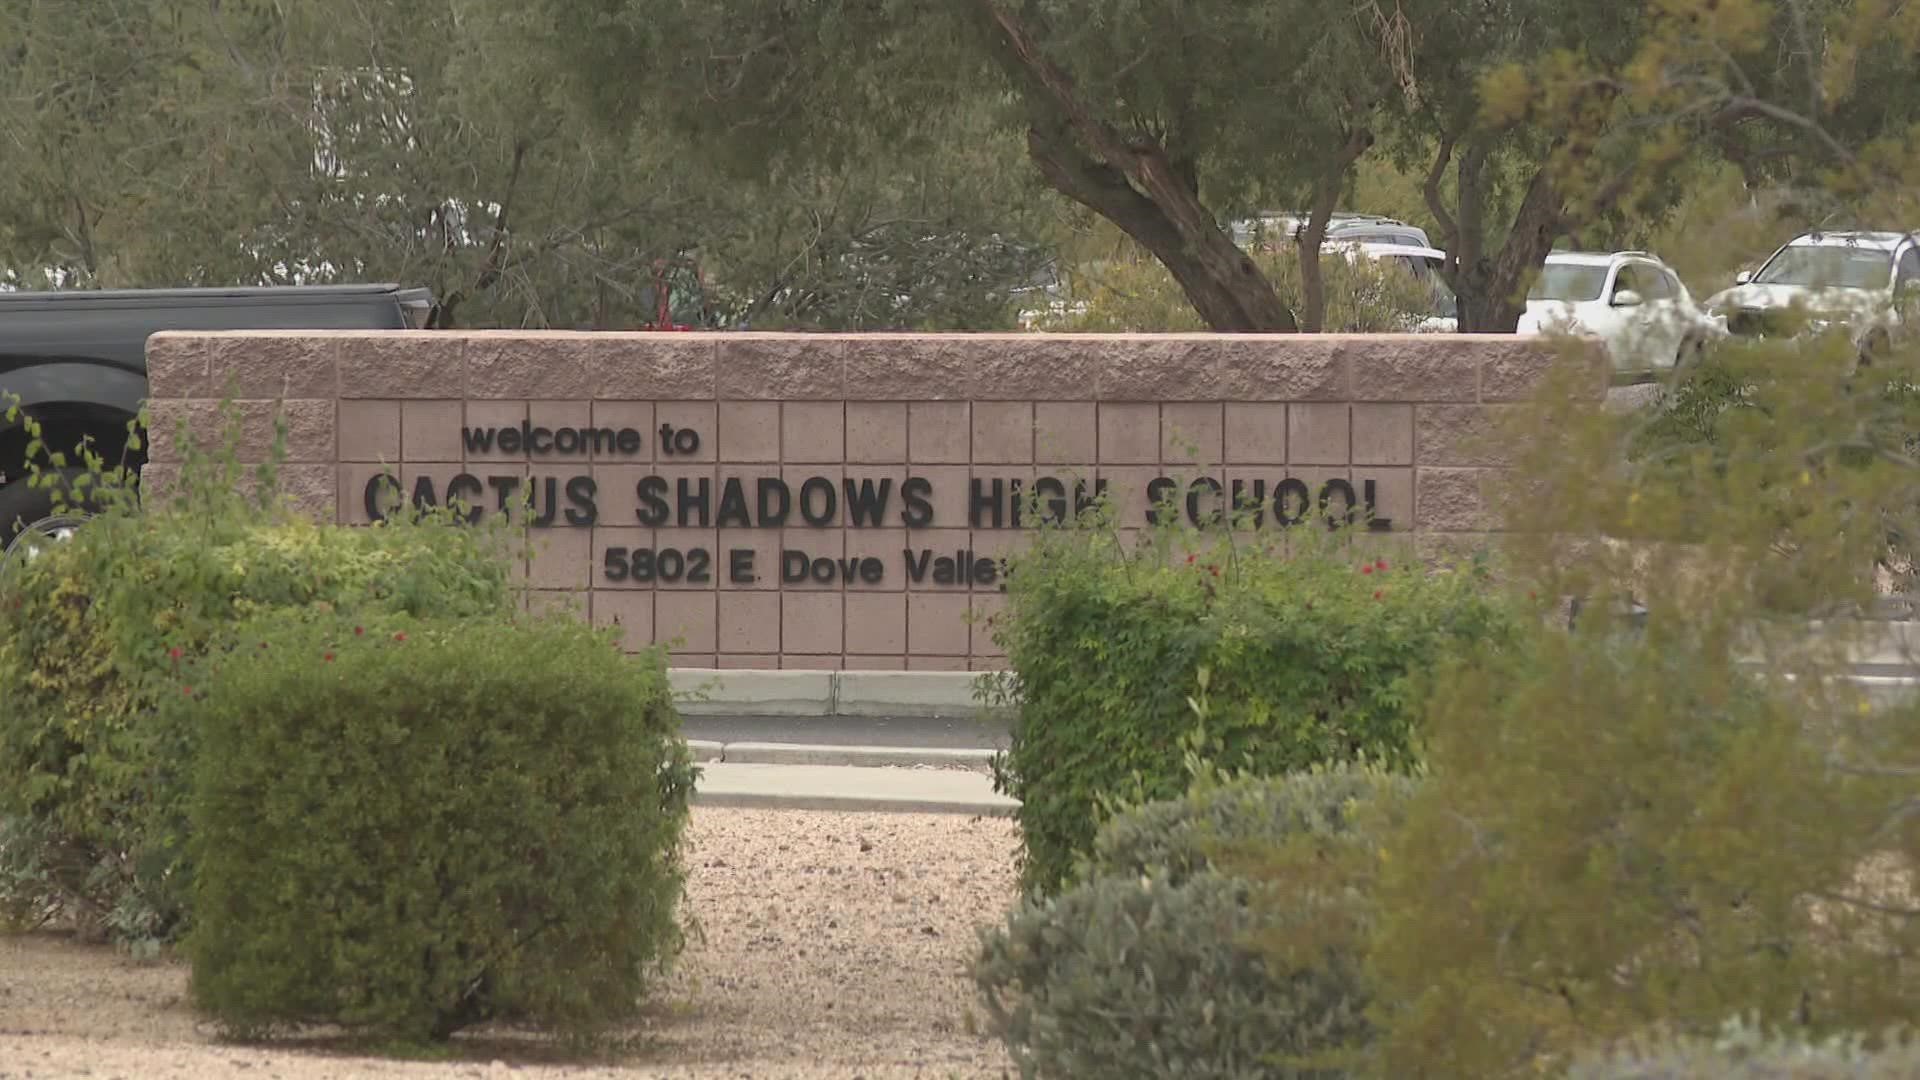 Scottsdale police say two schools under lockdown because of reports of an armed person have been given the all clear and all students are safe